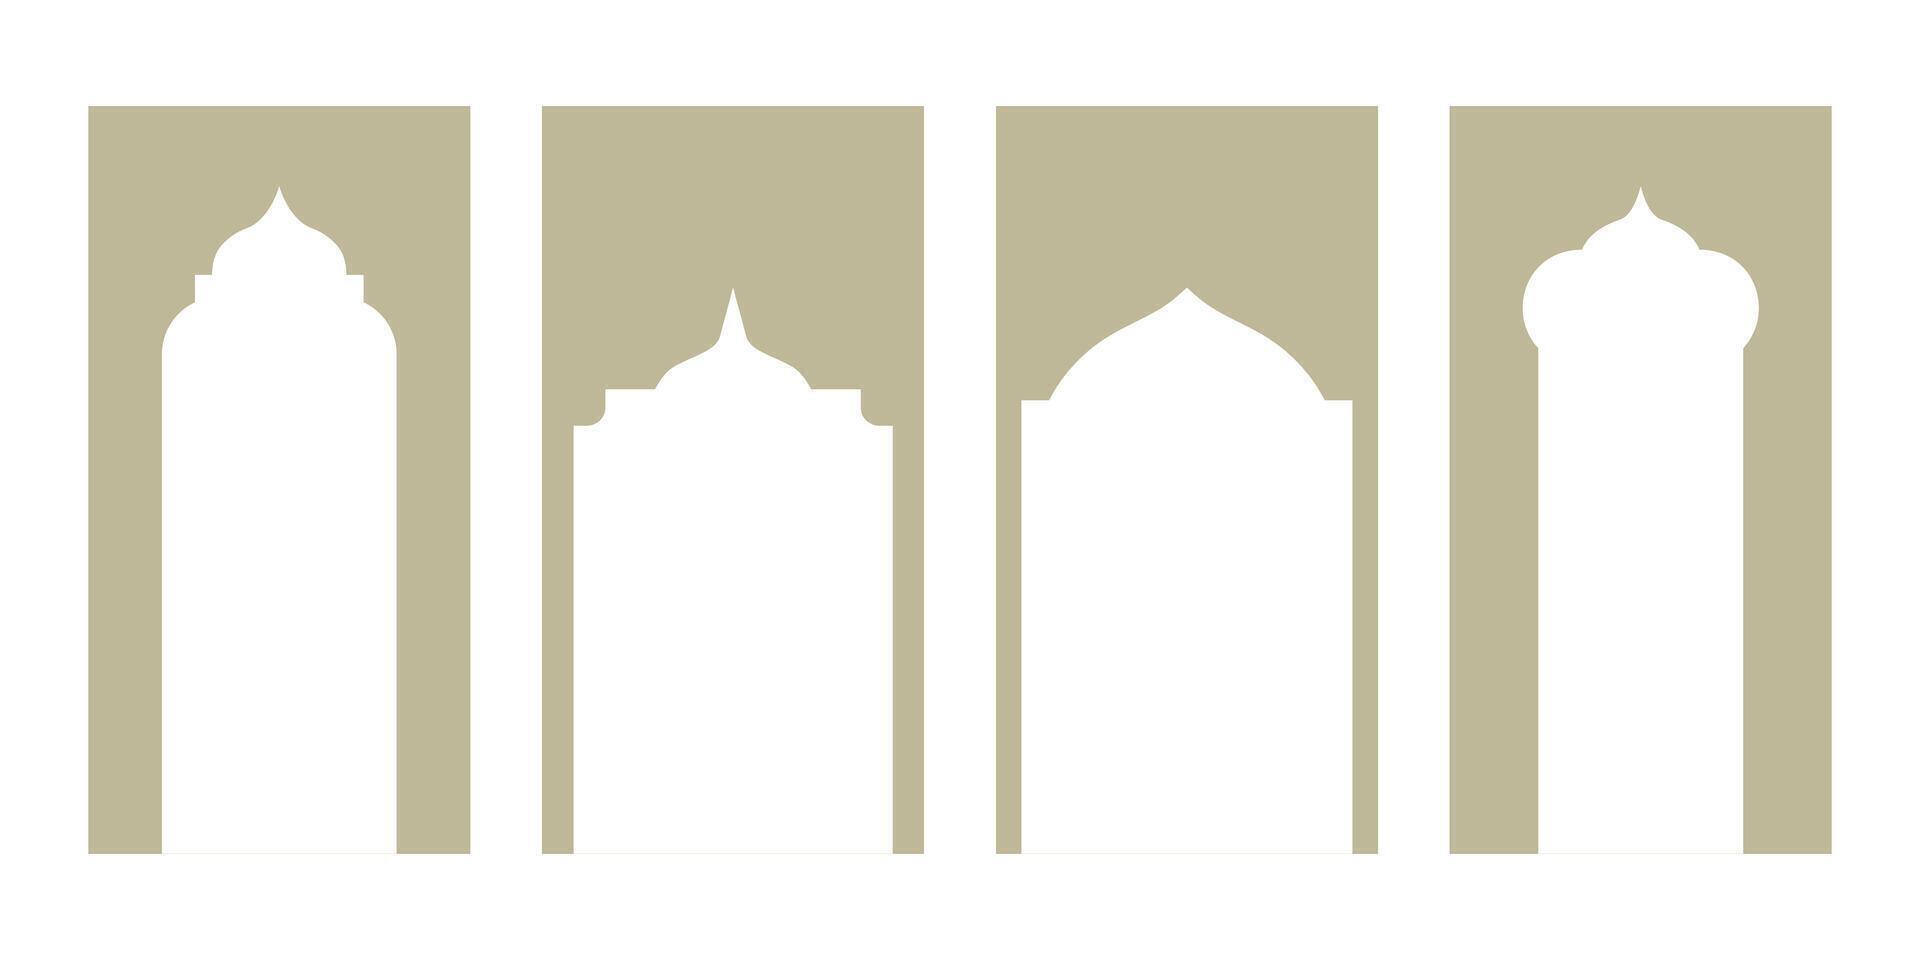 Enchanting Collection of Oriental Style Islamic Ramadan Kareem and Eid Mubarak Windows and Arches. Modern Design Featuring Doors, Mosque Domes, and Lanterns. Social media vertical template vector